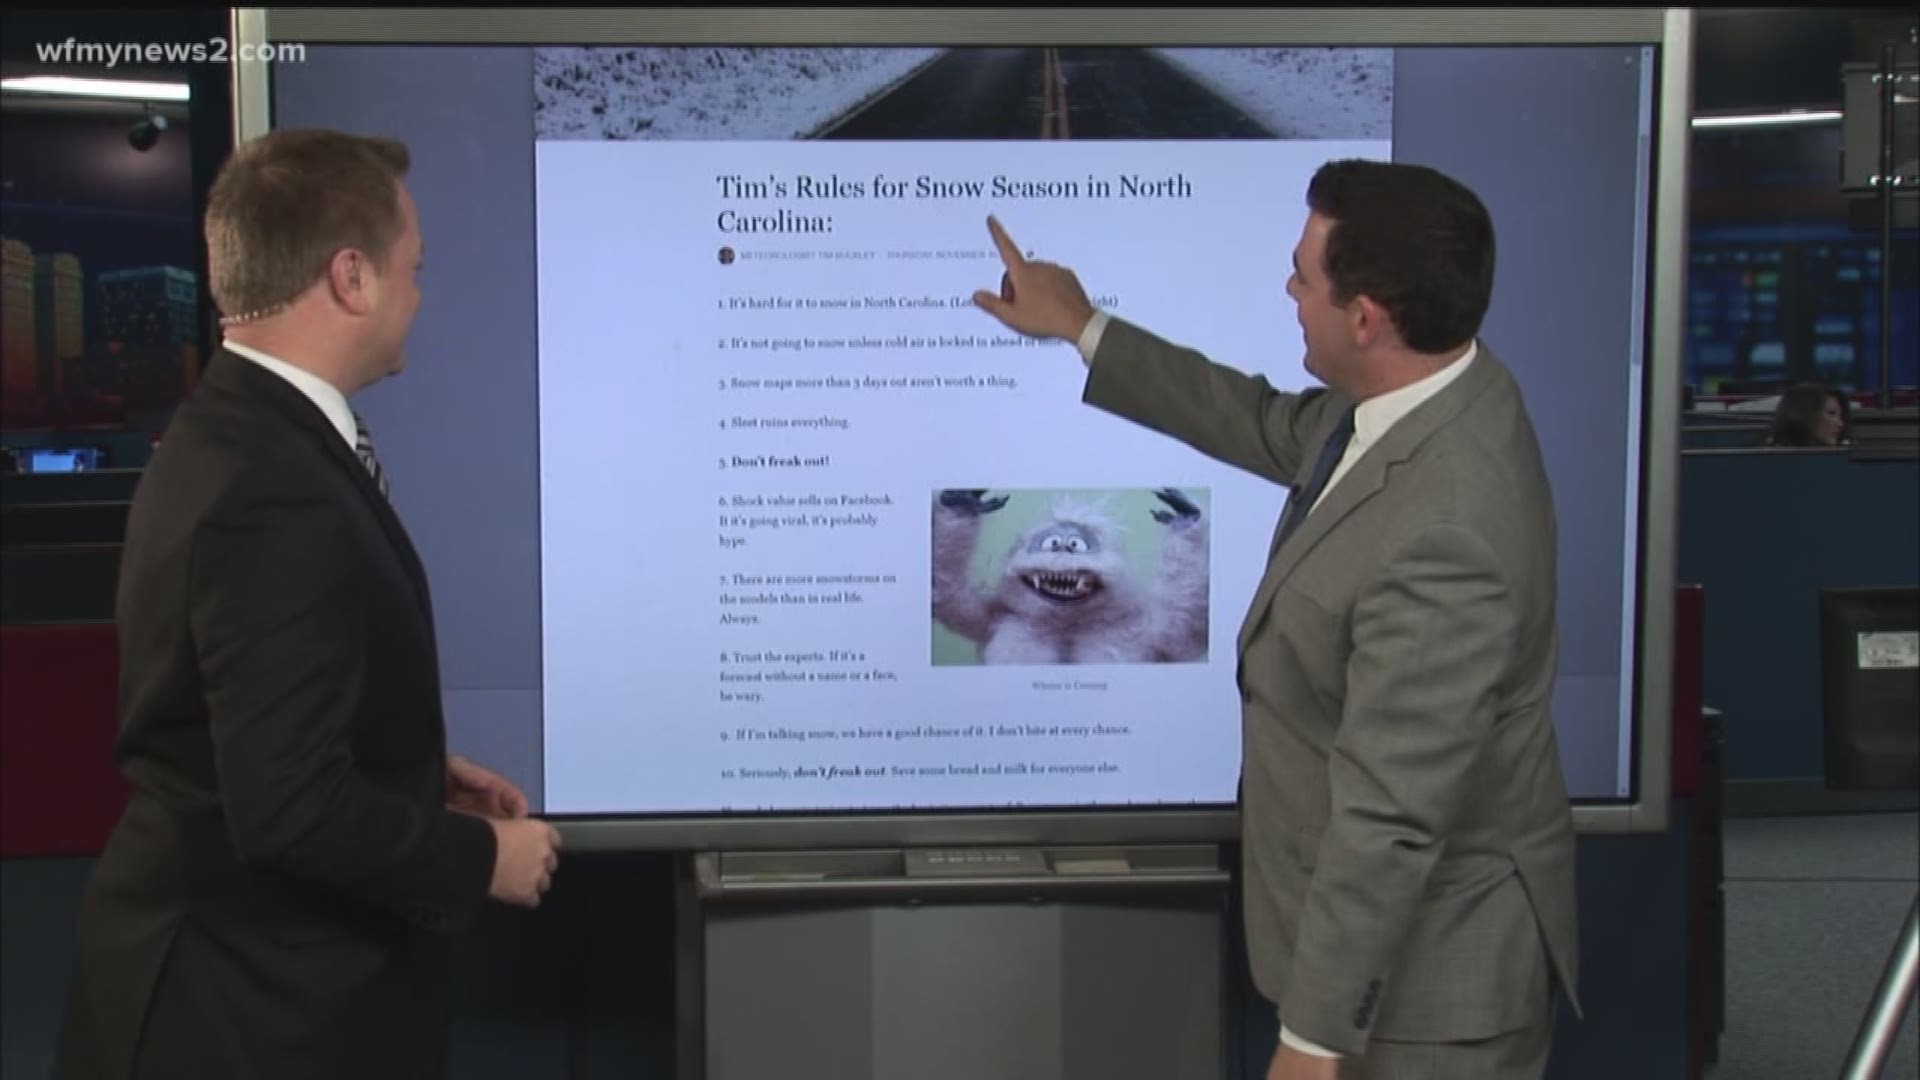 'Tis the season for snow rumors to start flying on social media. Meteorologist Tim Buckley created a set of rules to help keep you sane in snow season.